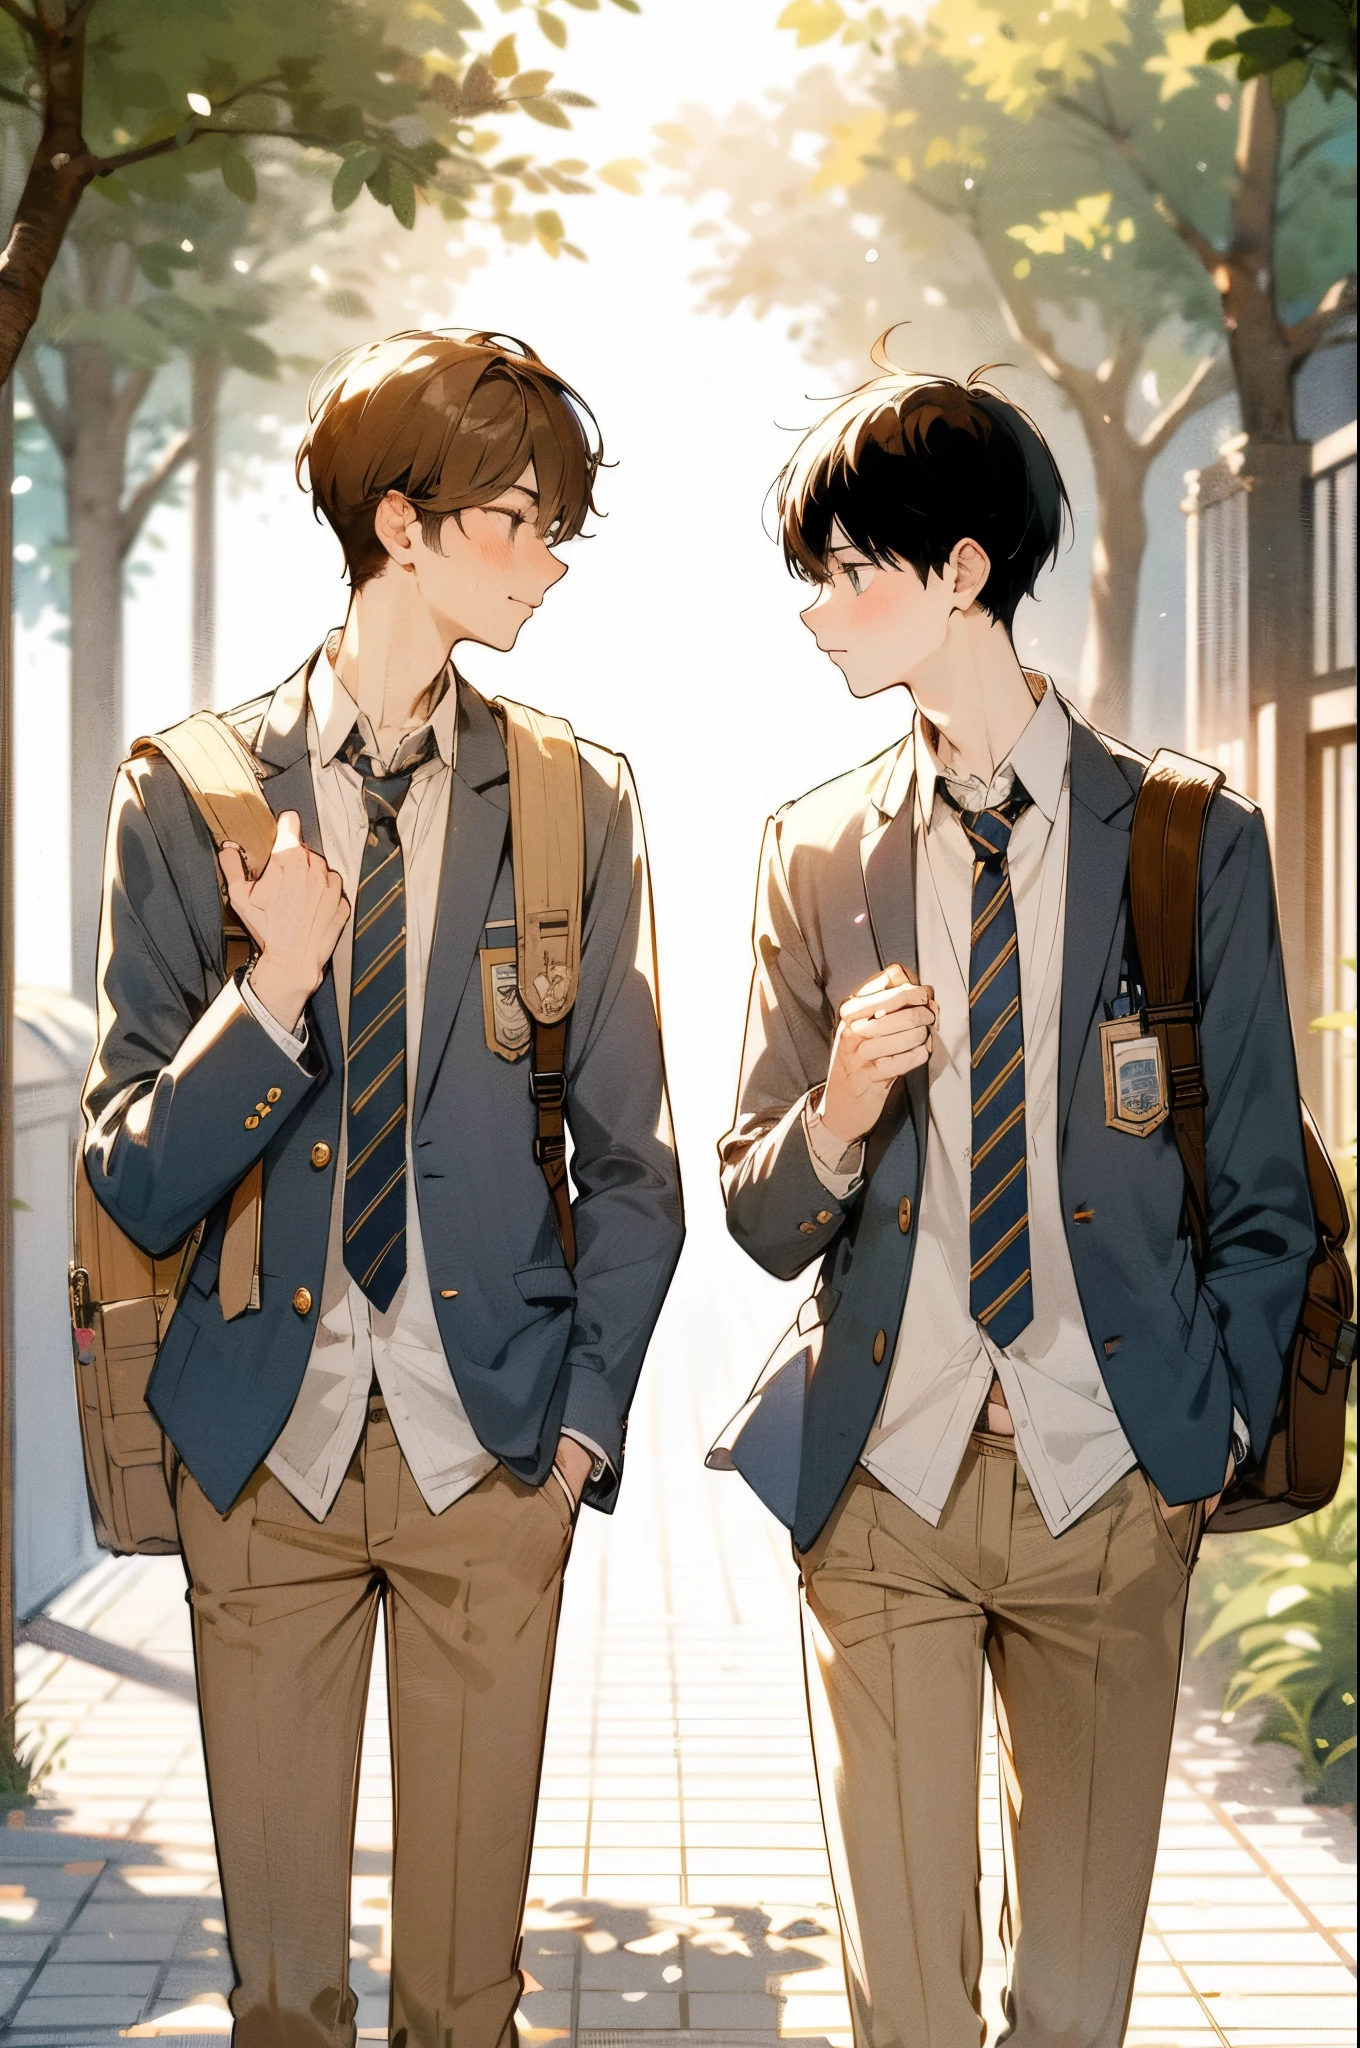 This is a Pixiv-style vertical illustration....。, depicting two handsome young men, one person has brown hair、The other has black hair...., Wear school uniforms and walk side by side. While walking along the tree-lined avenue bathed in the morning sun、Two people having a lively conversation. Artwork reflects Japanese anime style、There is a clear line drawing, Transparent watercolor, and clear shading, Moments of friendship、A photo that captures the serene beauty of the morning walk to school